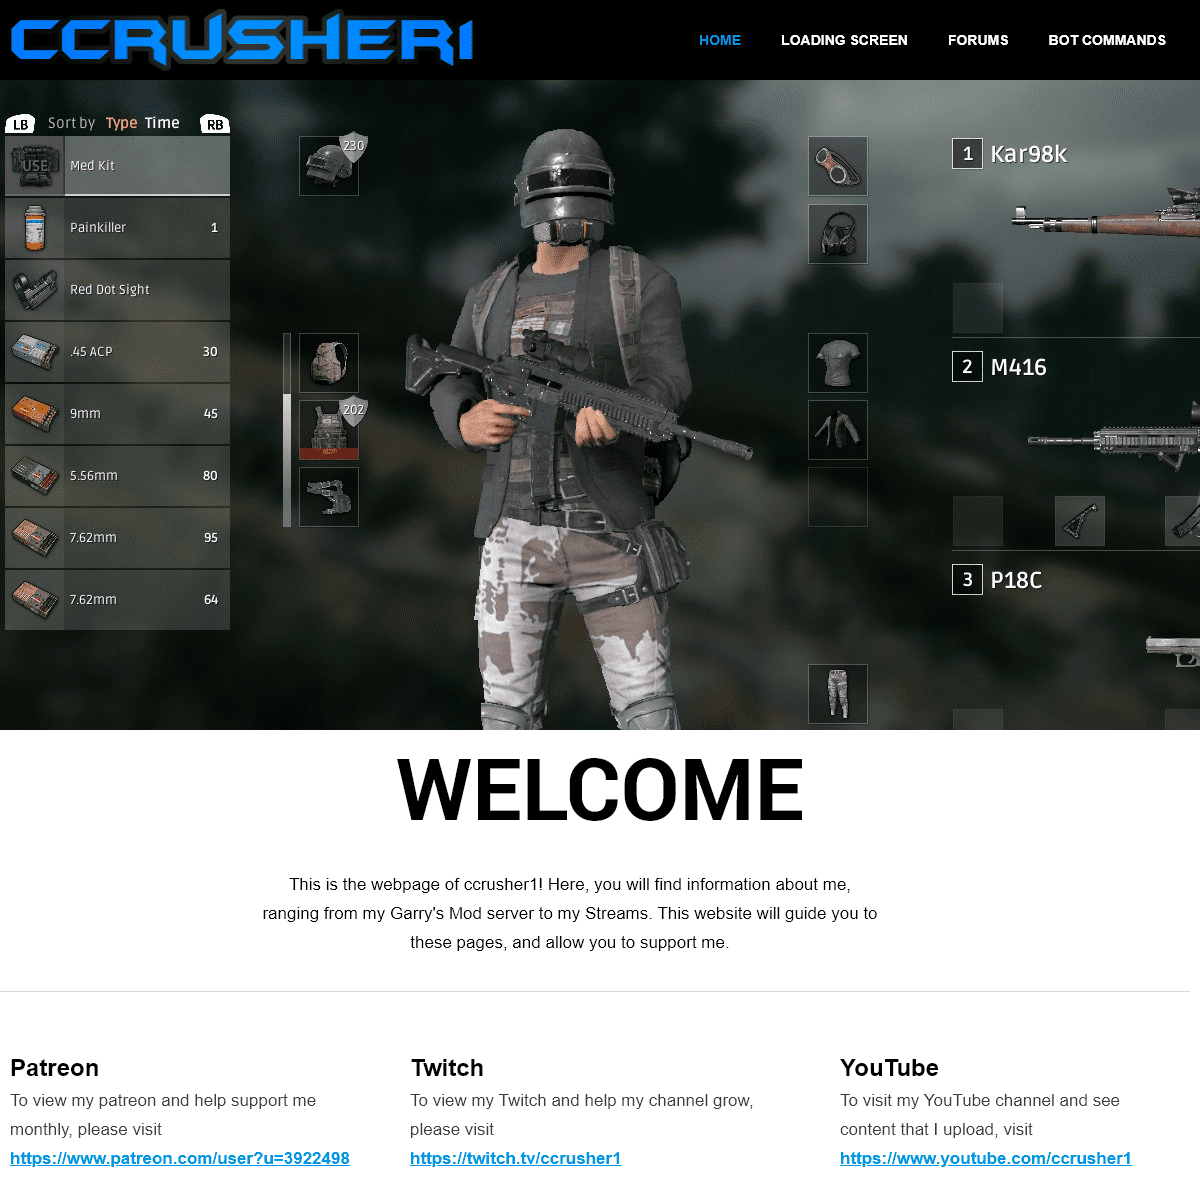 A complete backup of ccrusher1.com